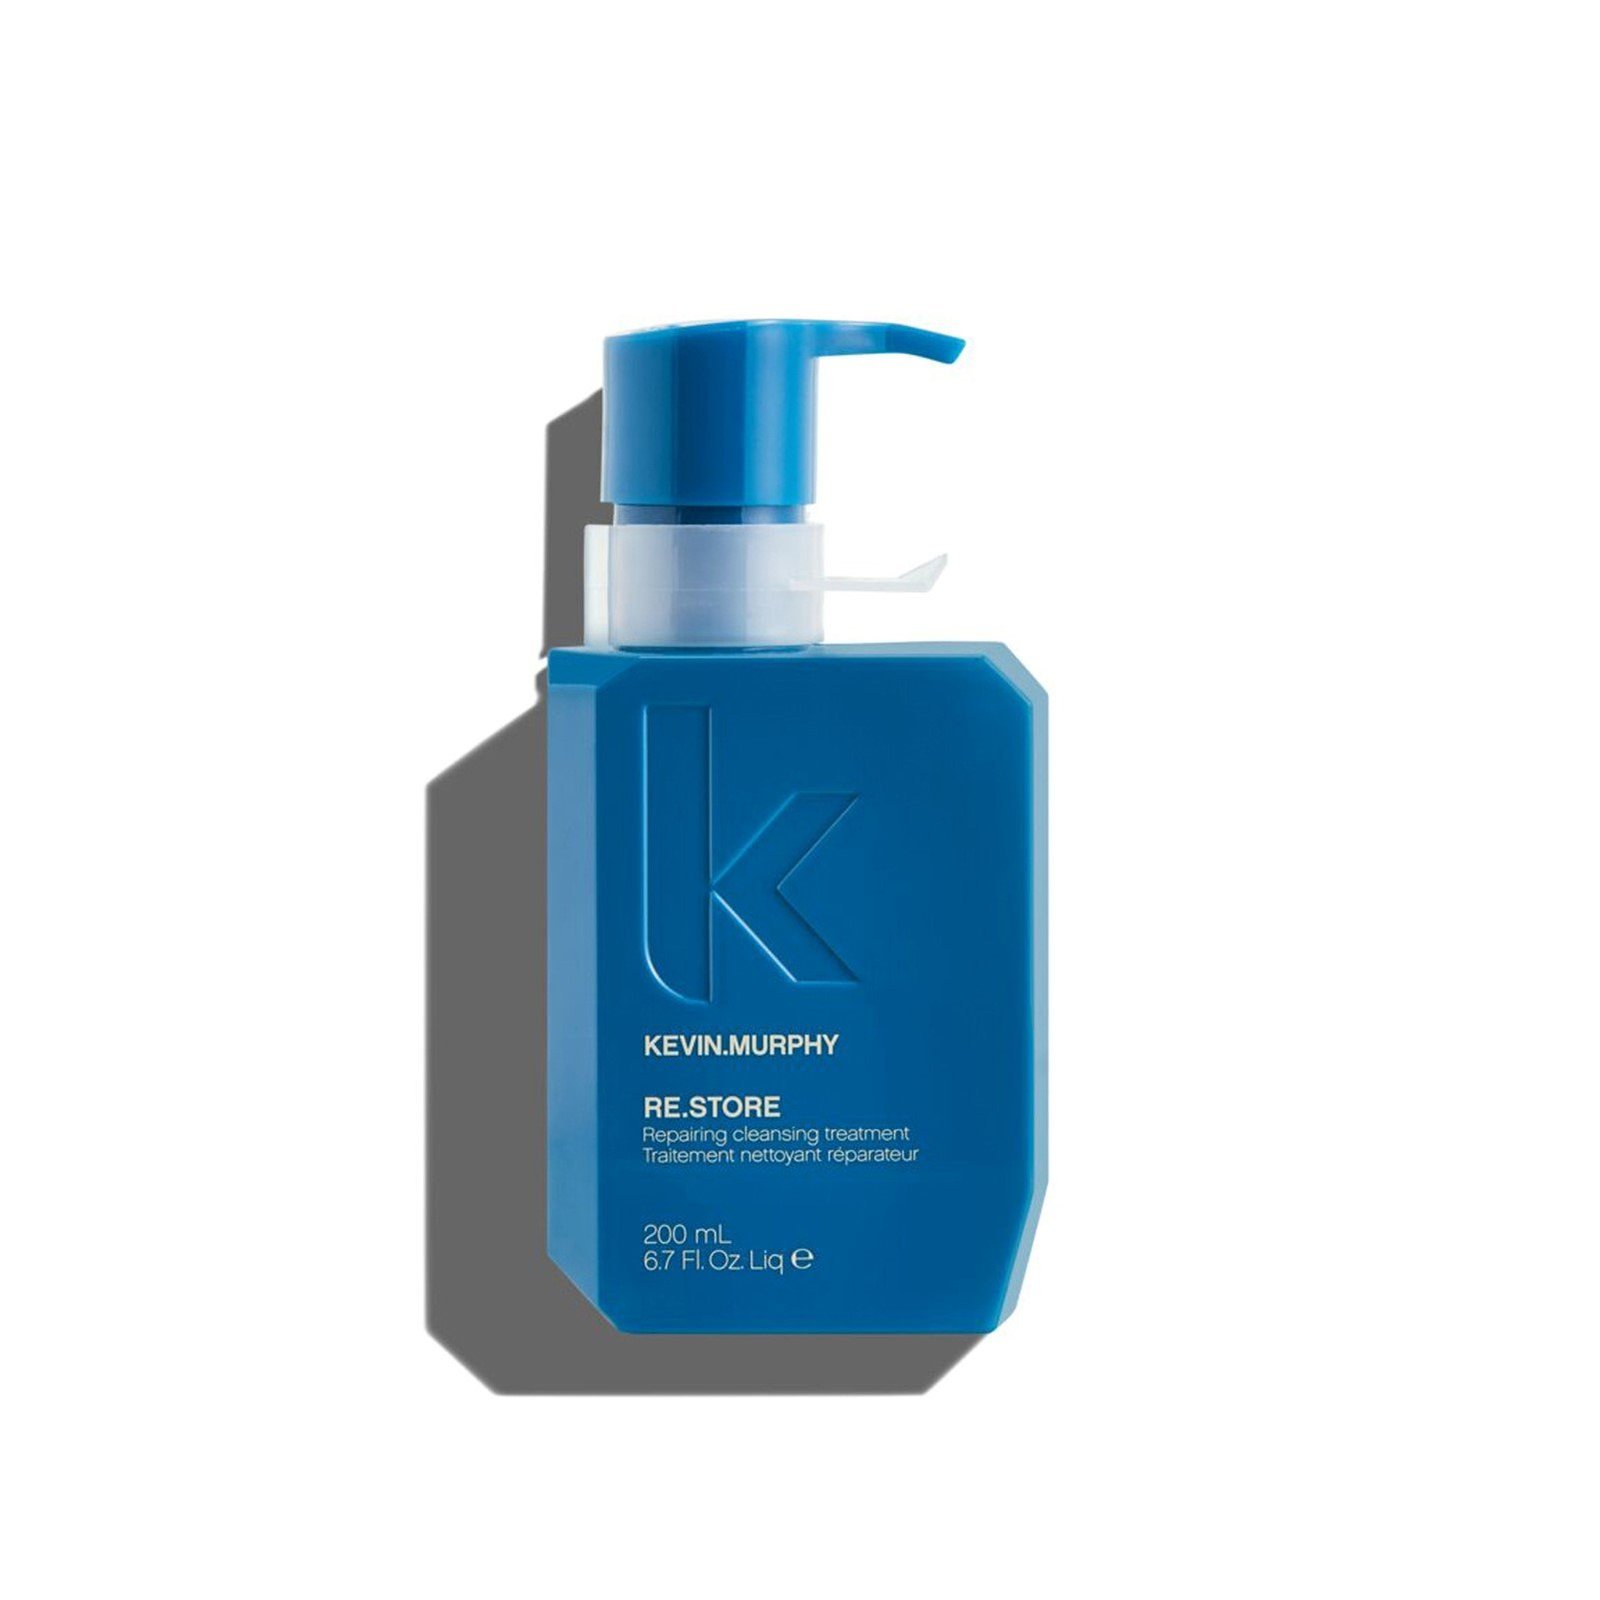 Kevin Murphy Re-Store Repairing Cleansing Treatment 200ml (6.7 fl oz)